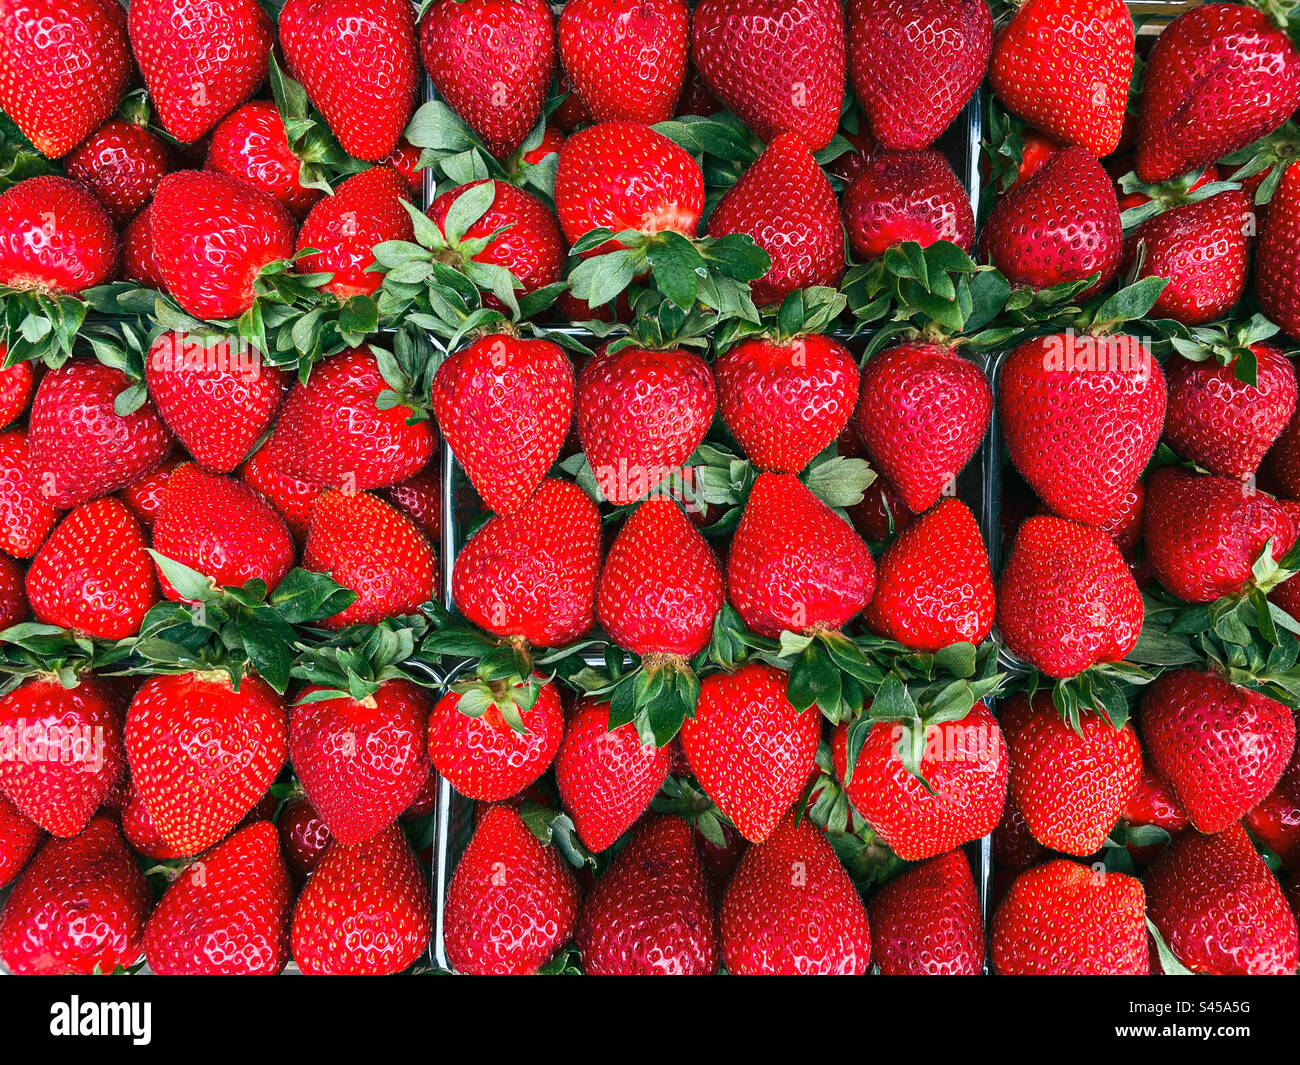 Ripe red strawberries in baskets Stock Photo